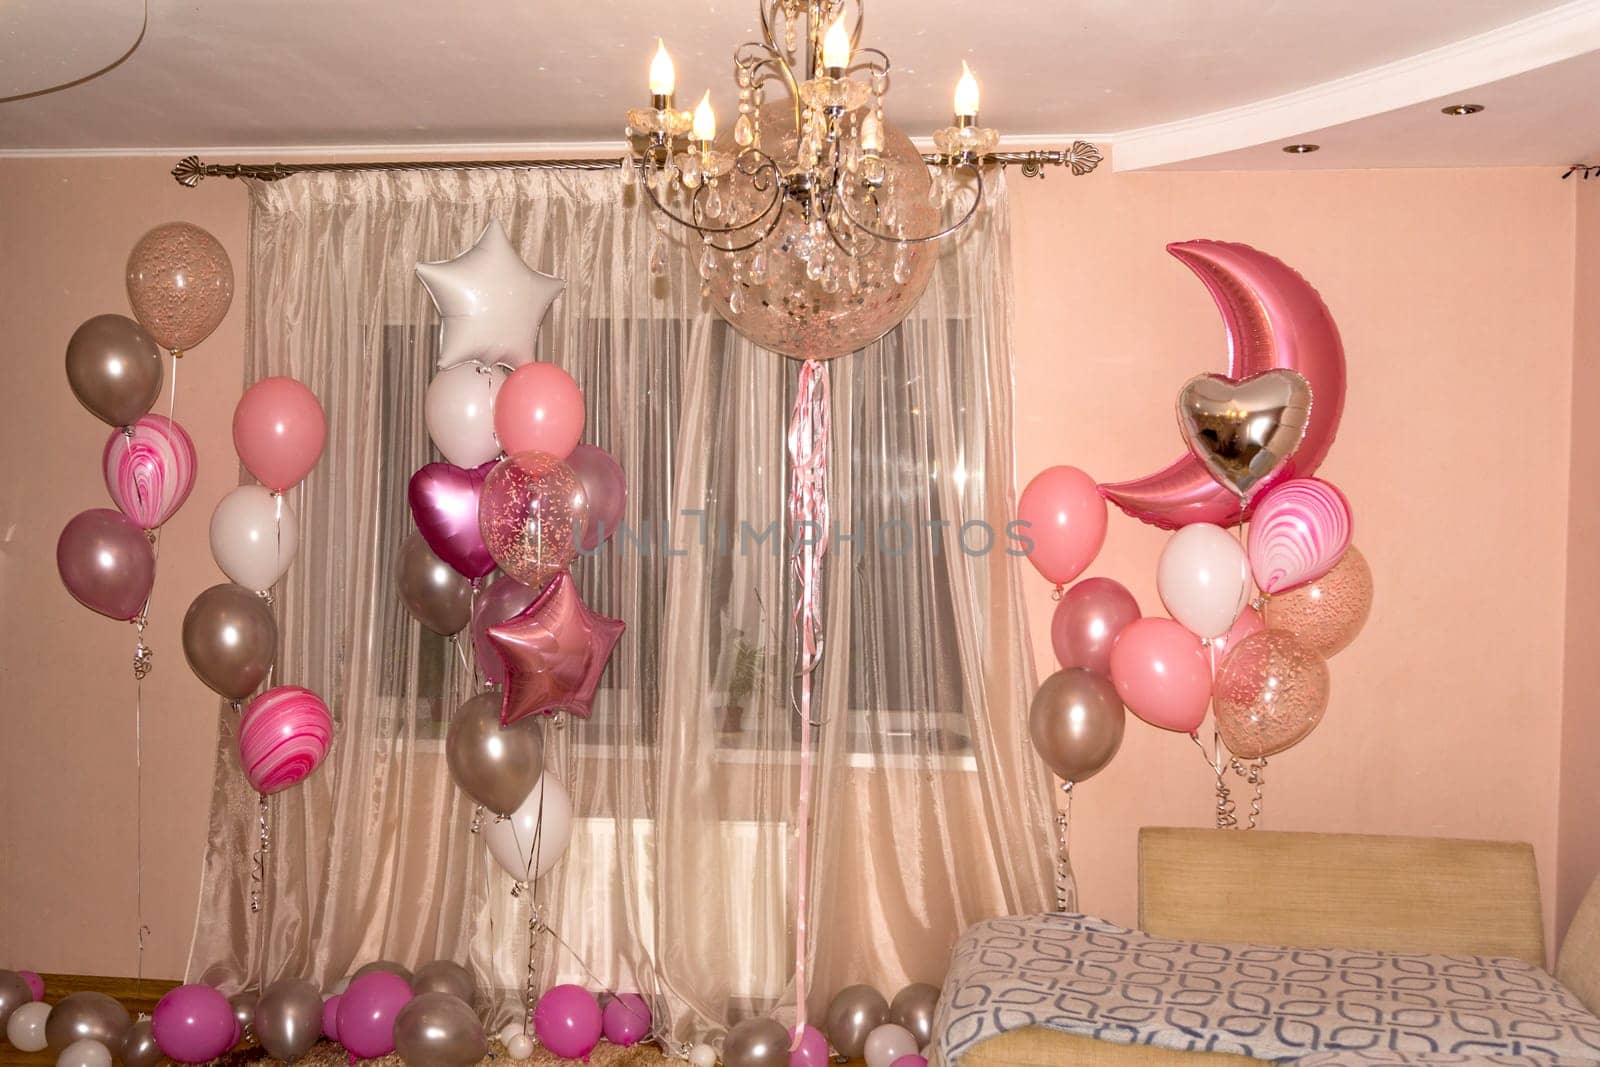 The room is decorated with various balloons by Serhii_Voroshchuk